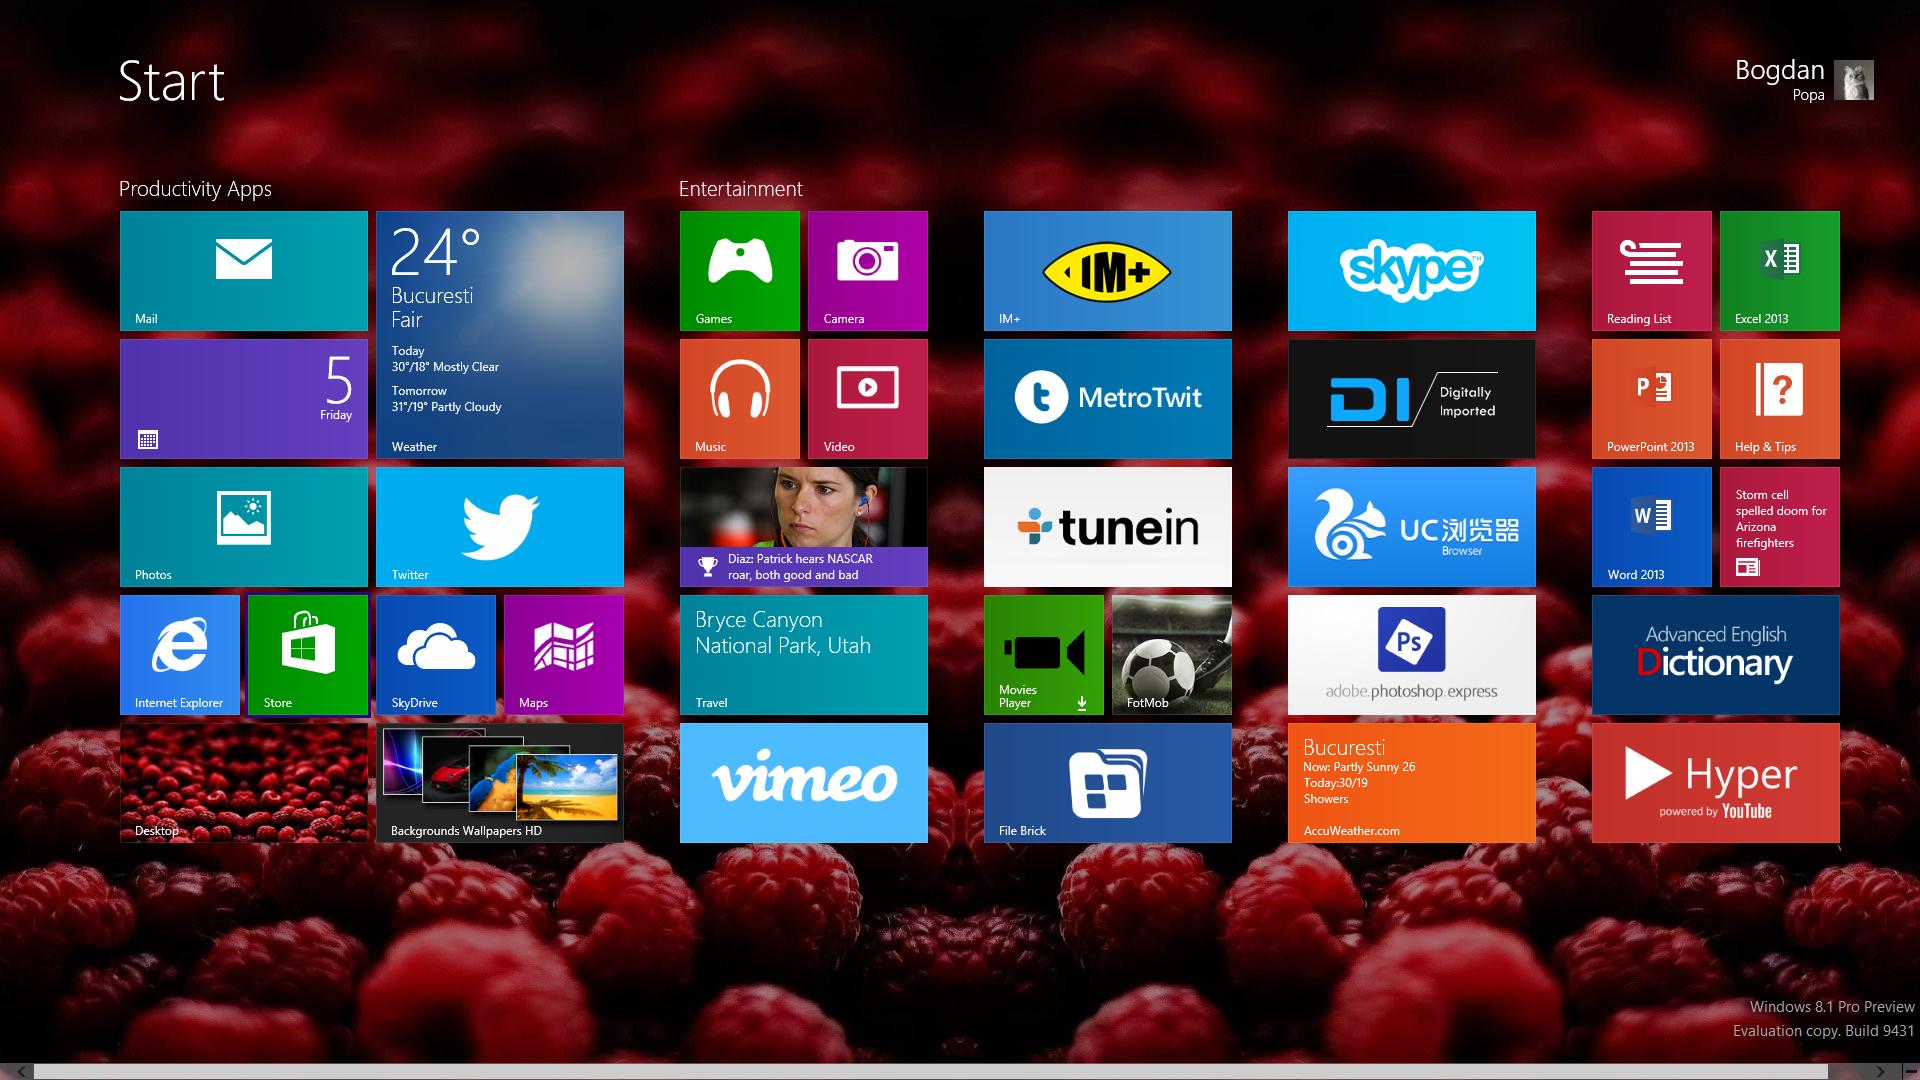 Start screen wallpaper dimming is turned on by default in Windows 81 1920x1080